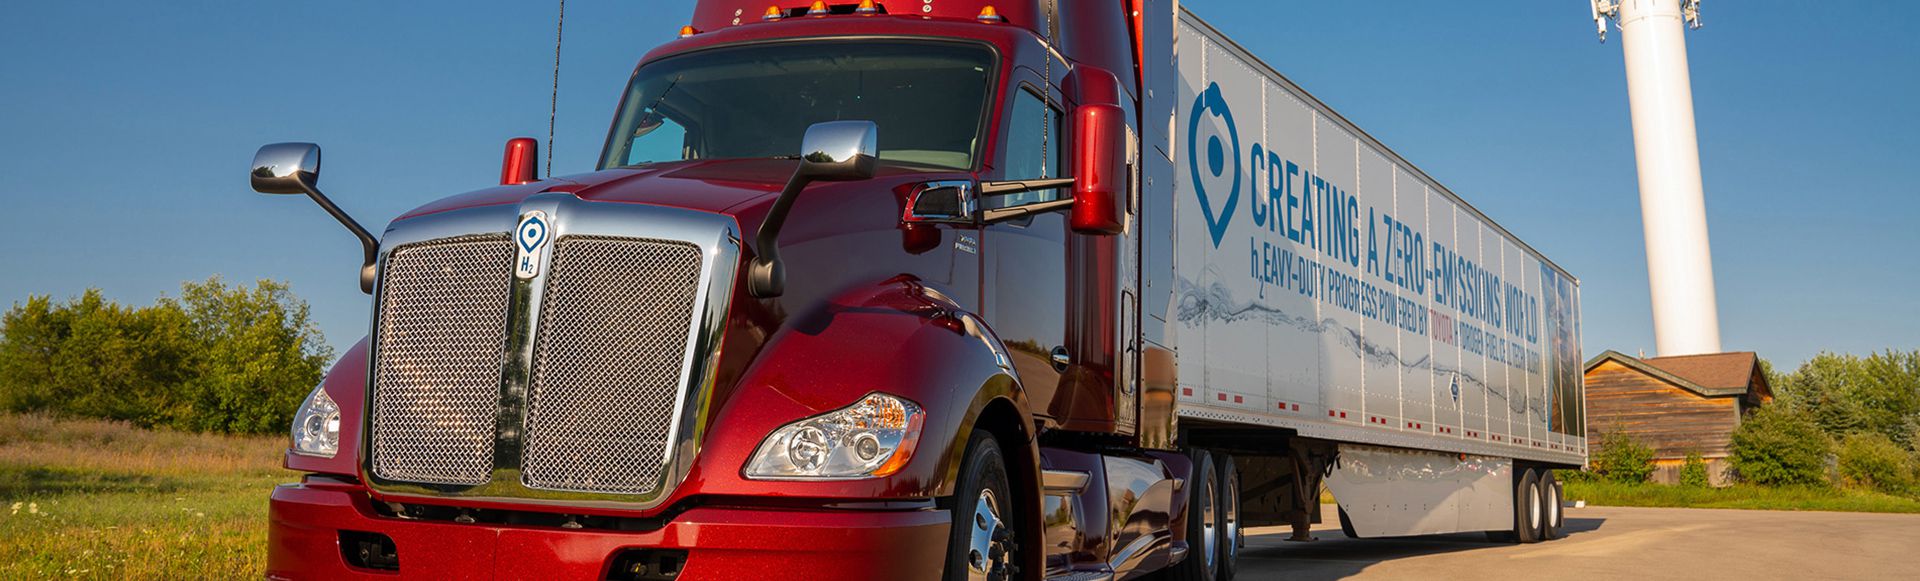 Port of Los Angeles Preliminarily Awarded $41 Million from California Air Resources Board to Launch Zero Emissions Hydrogen-Fuel-Cell-Electric Freight Project